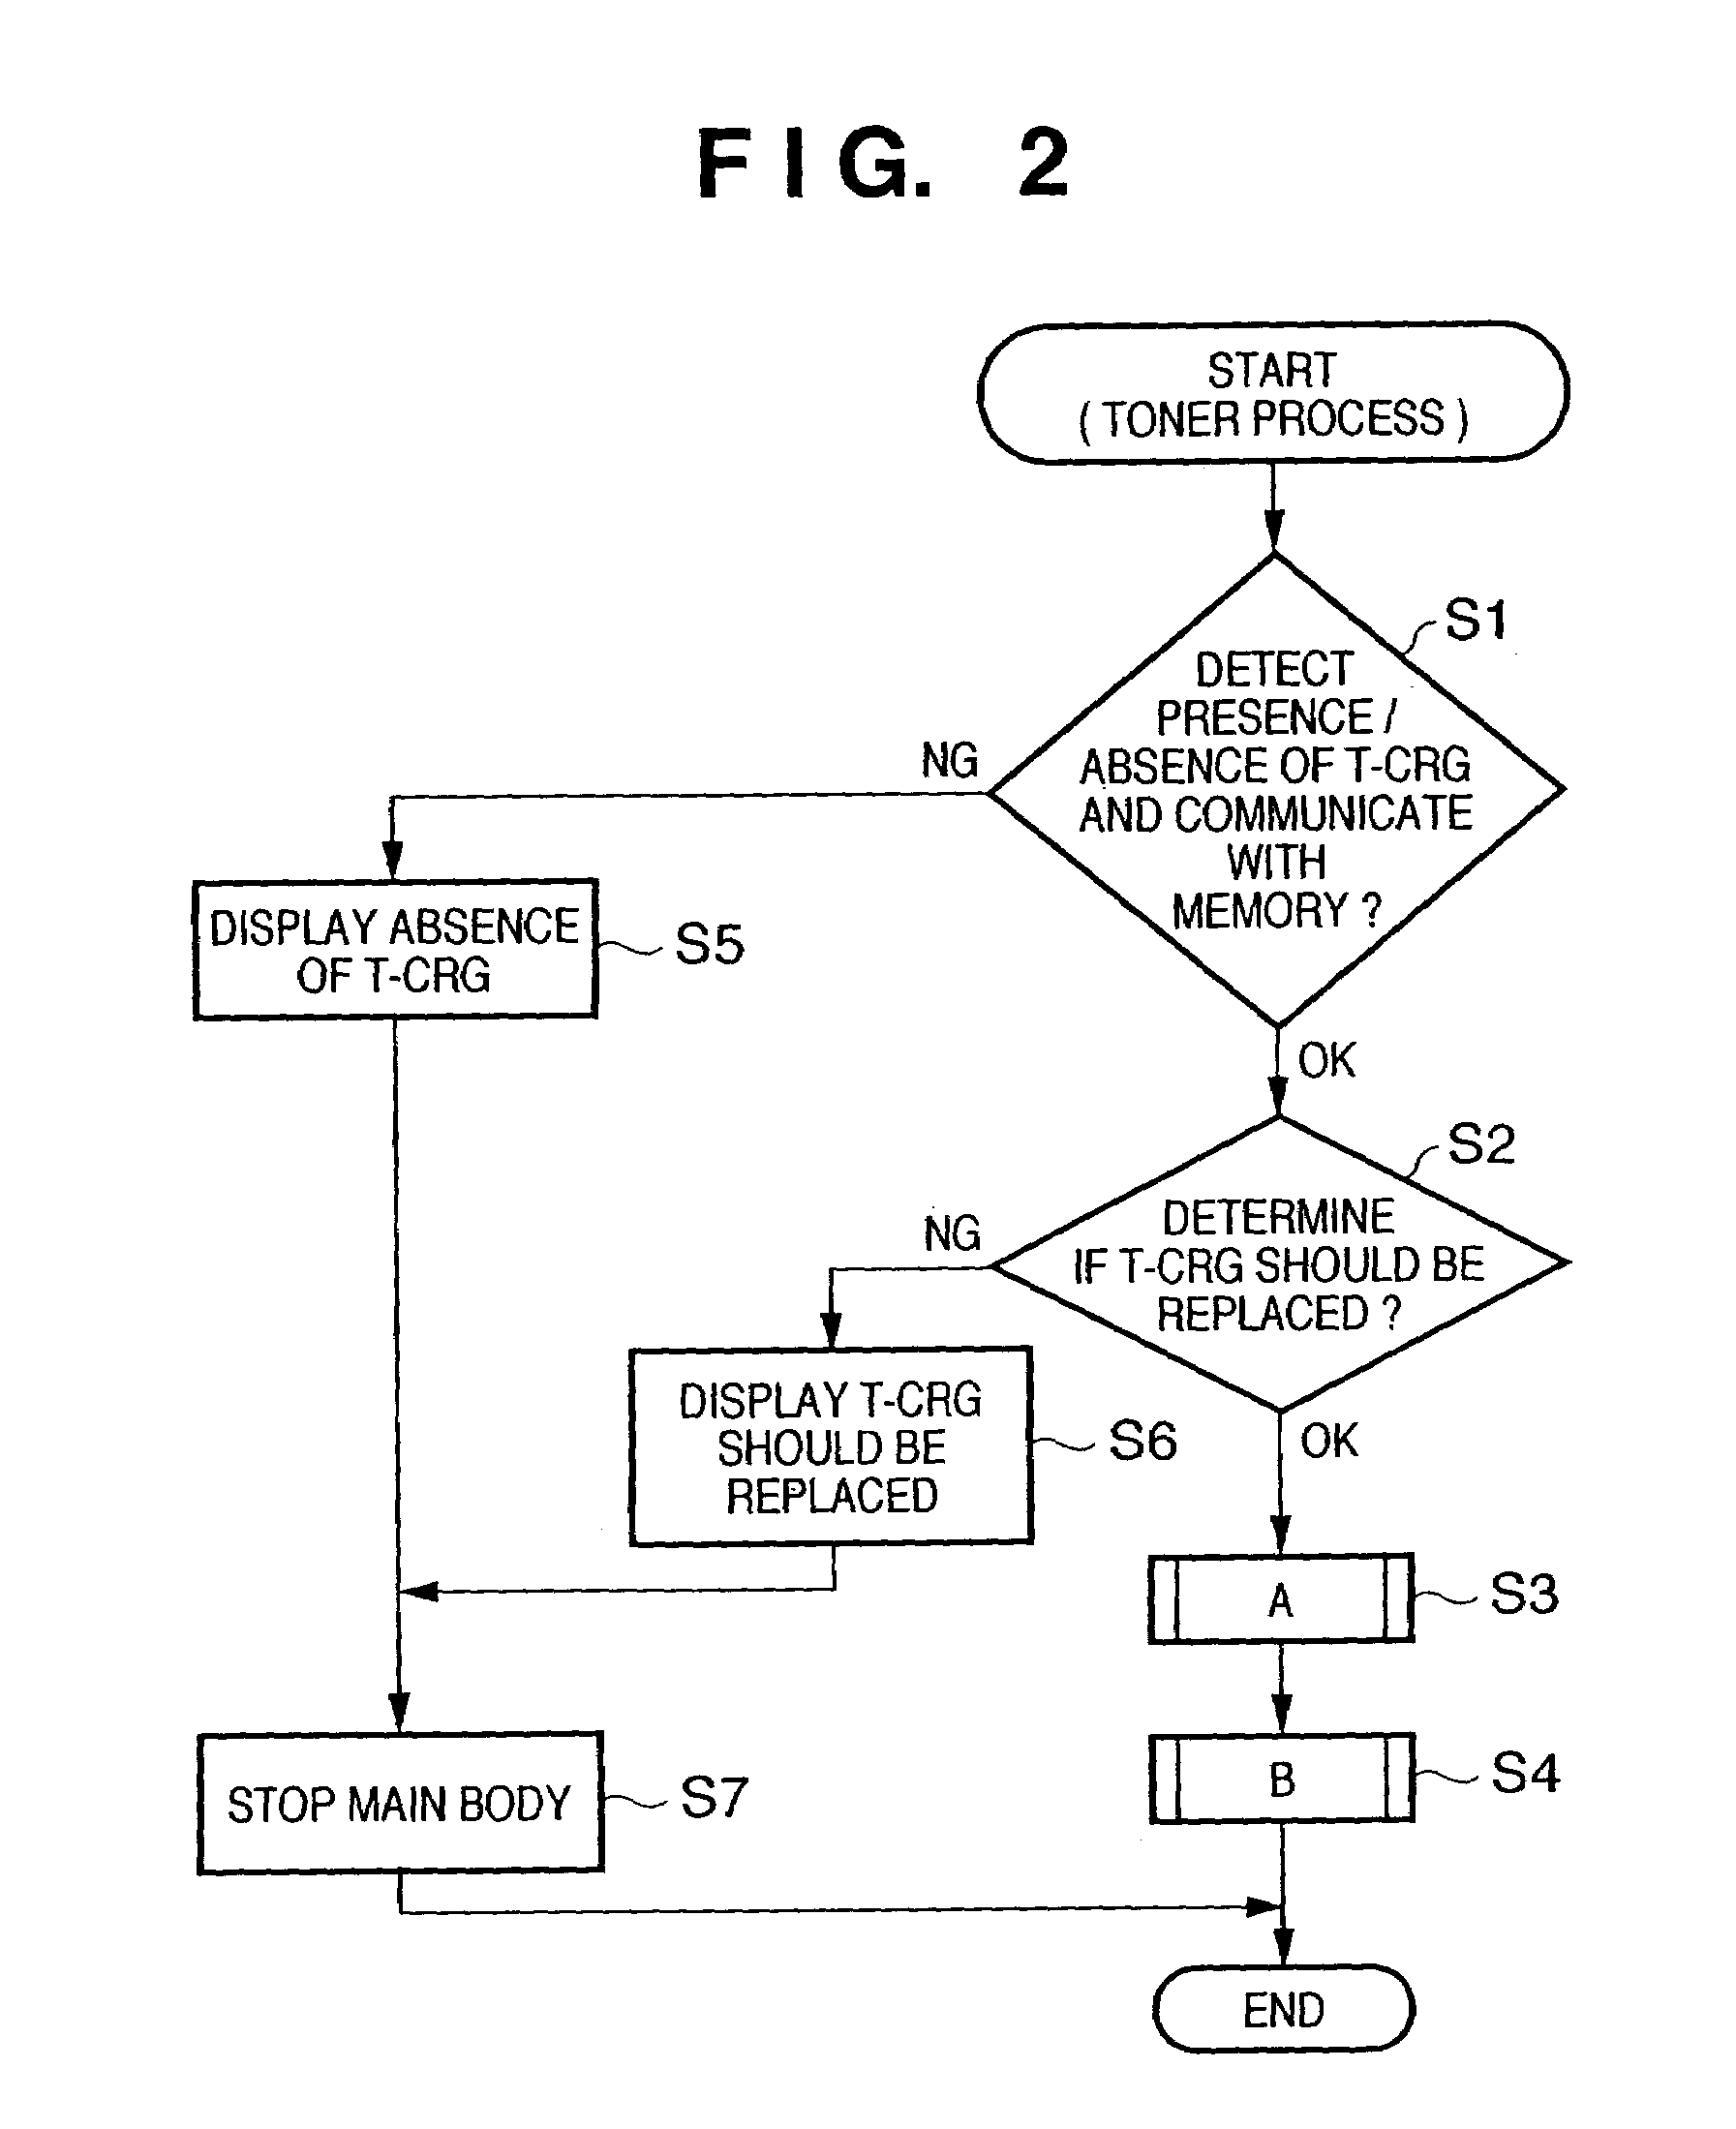 Image forming apparatus with a toner replenishing control feature based on stored toner density and fluidity information, related method, and developing agent replenishing container for same